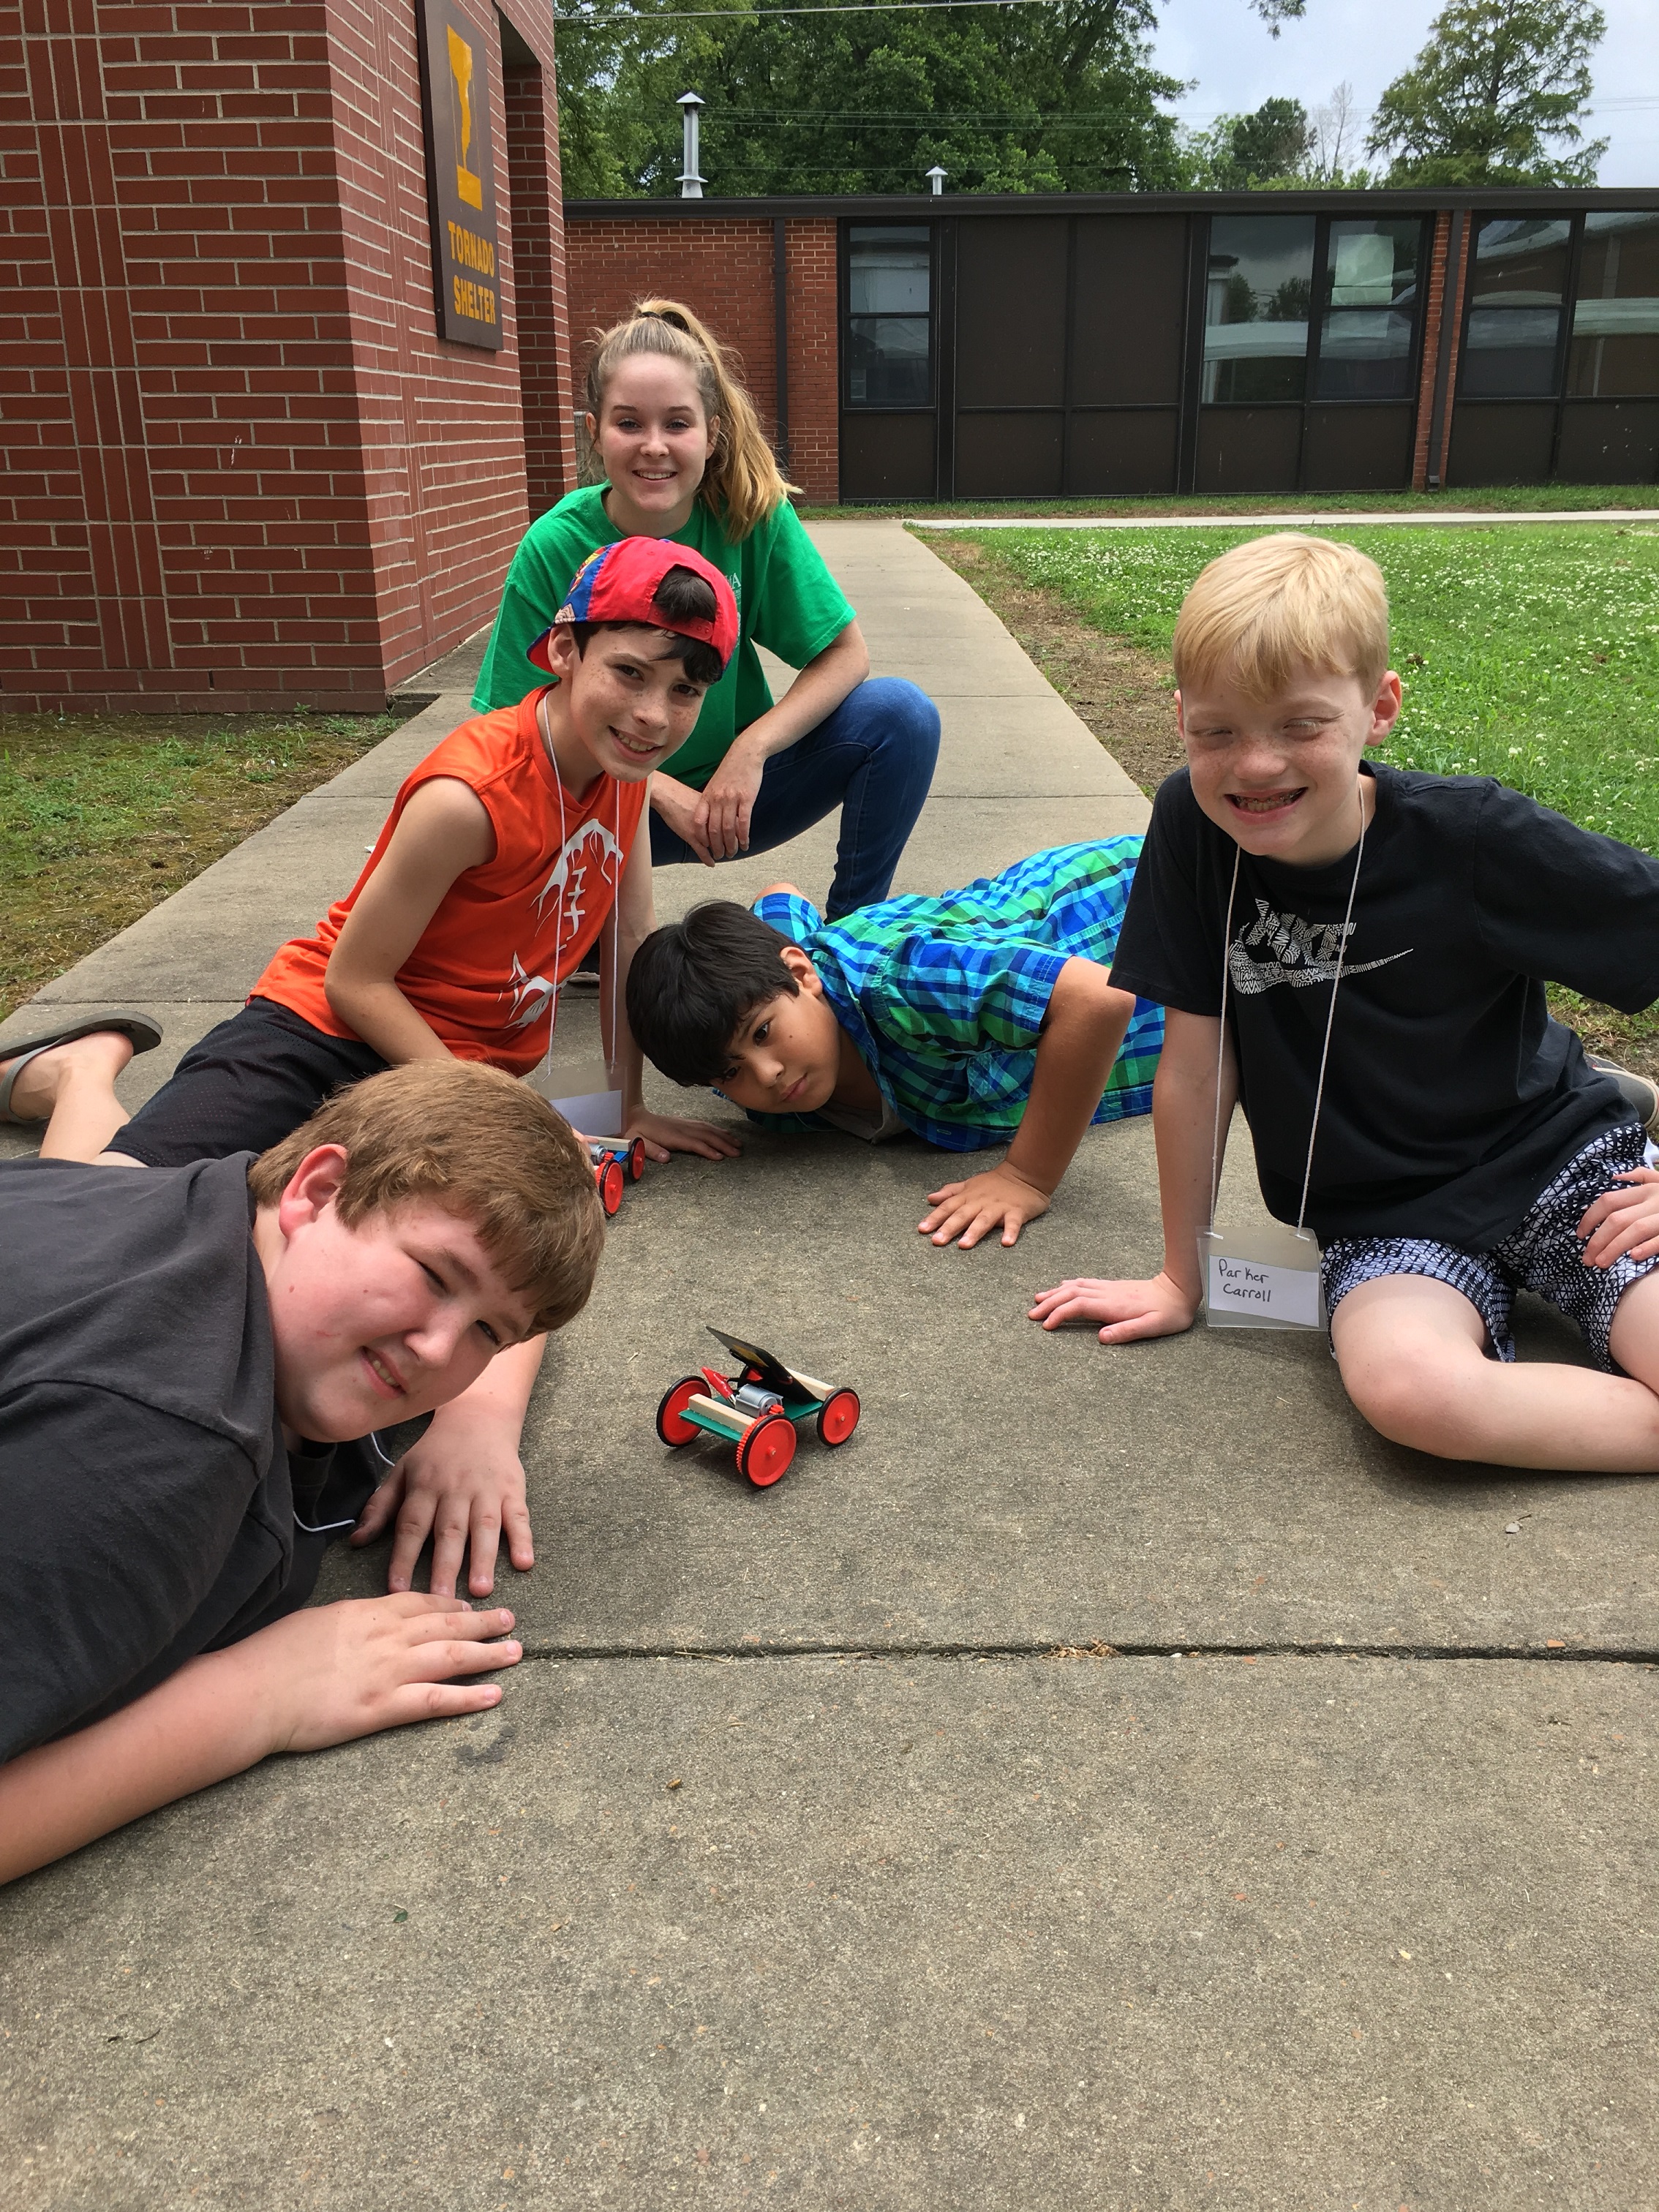 County 4-H STEM Camp allowed youth to gain knowledge and leadership skills through hands-on learning activities.